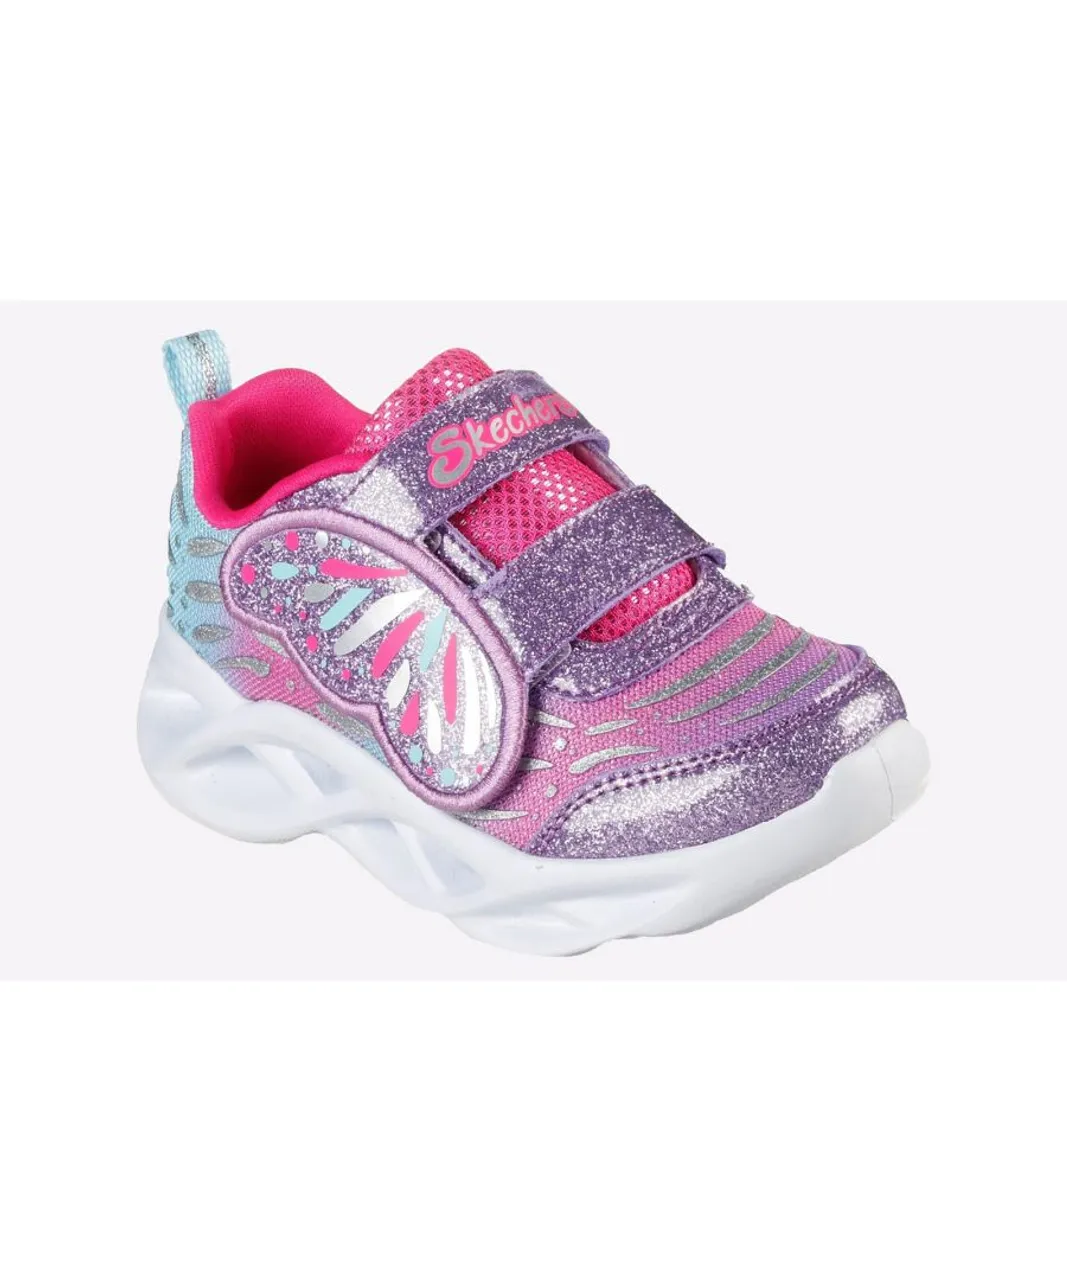 Skechers Childrens Unisex Twisty Brights Wingin' It Infant - Pink Mixed Material